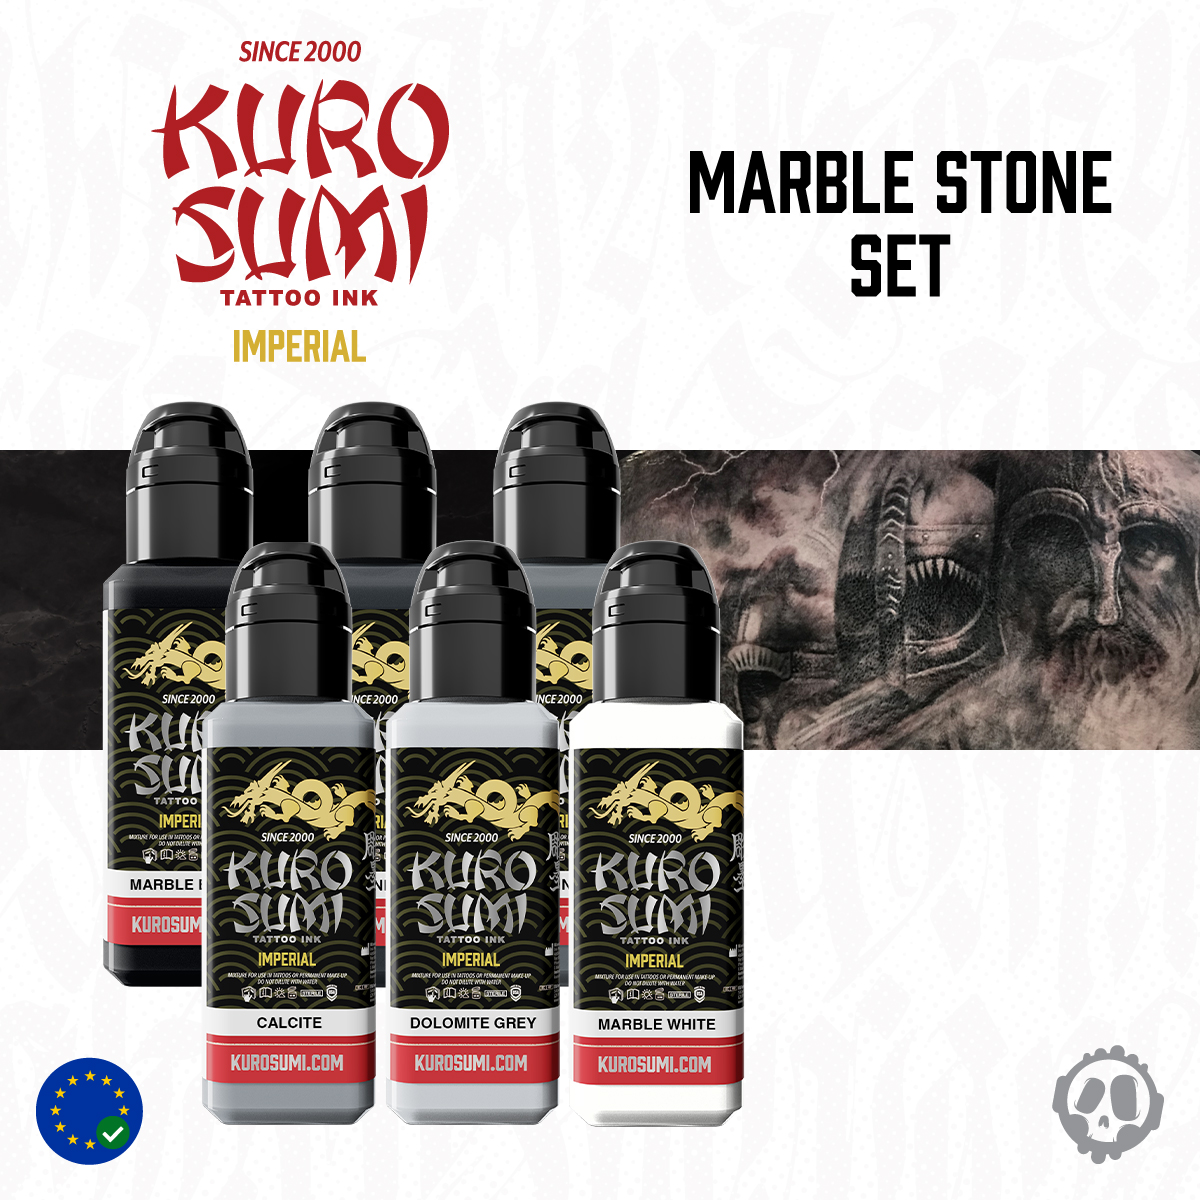 Killer Ink Tattoo on X: The Marble Stone Set from Kuro Sumi joins the new  EU REACH compliant Imperial range.  This #ink set  features 6 inks with earthy colours for strengthening